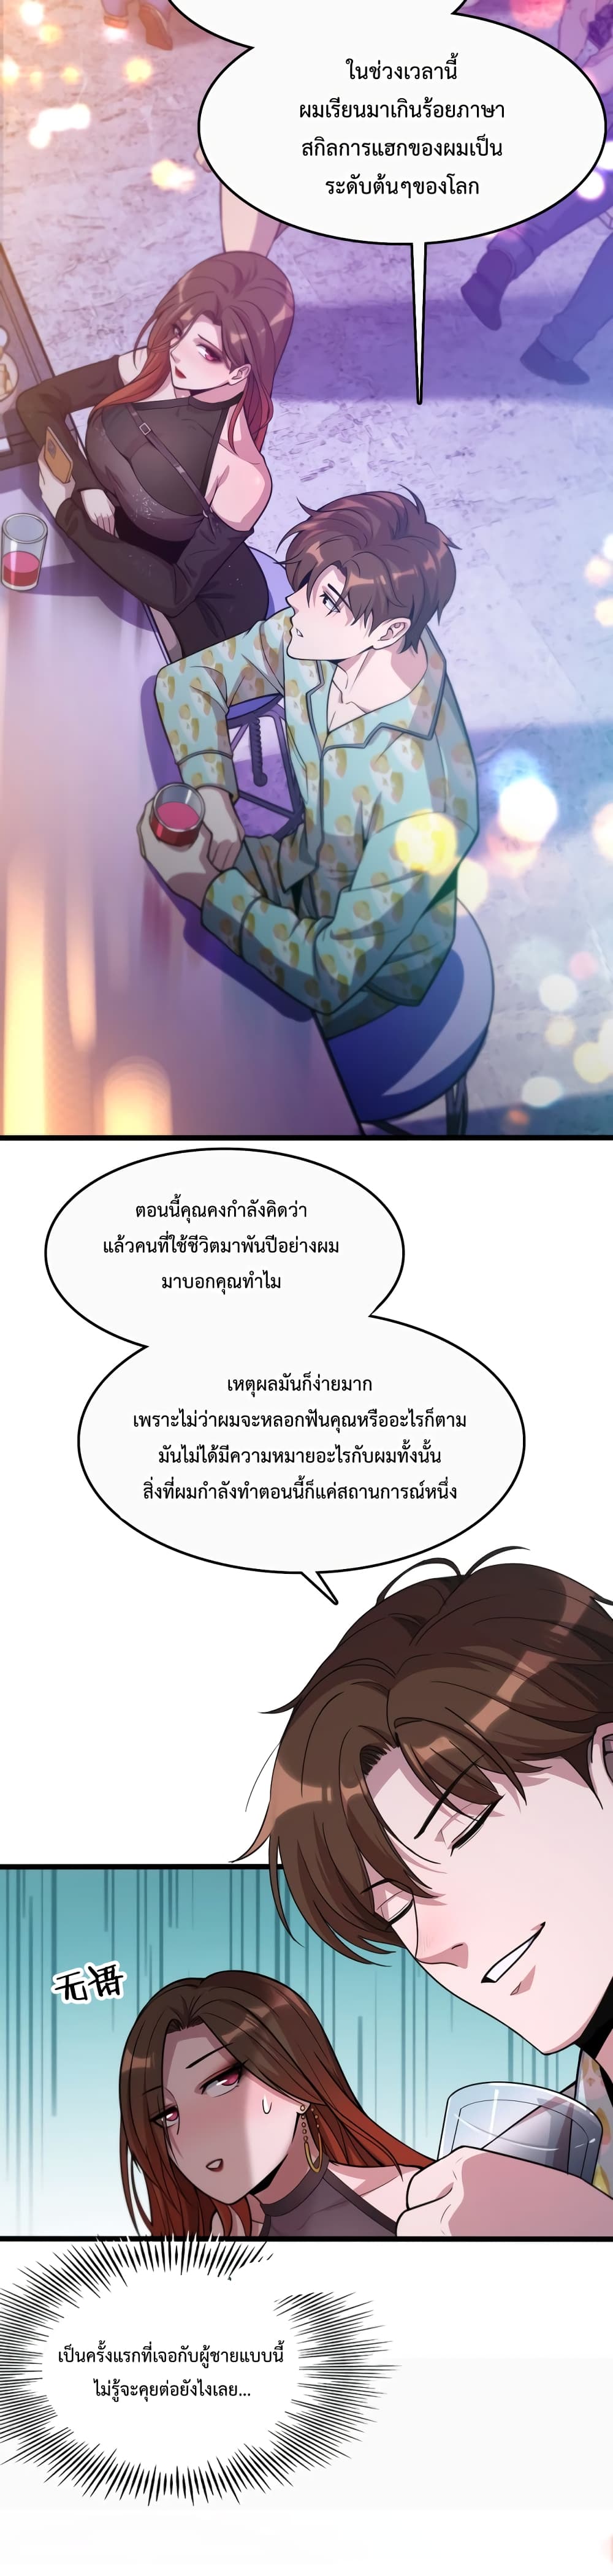 I’m Stuck on the Same Day for a Thousand Years ตอนที่ 1 08